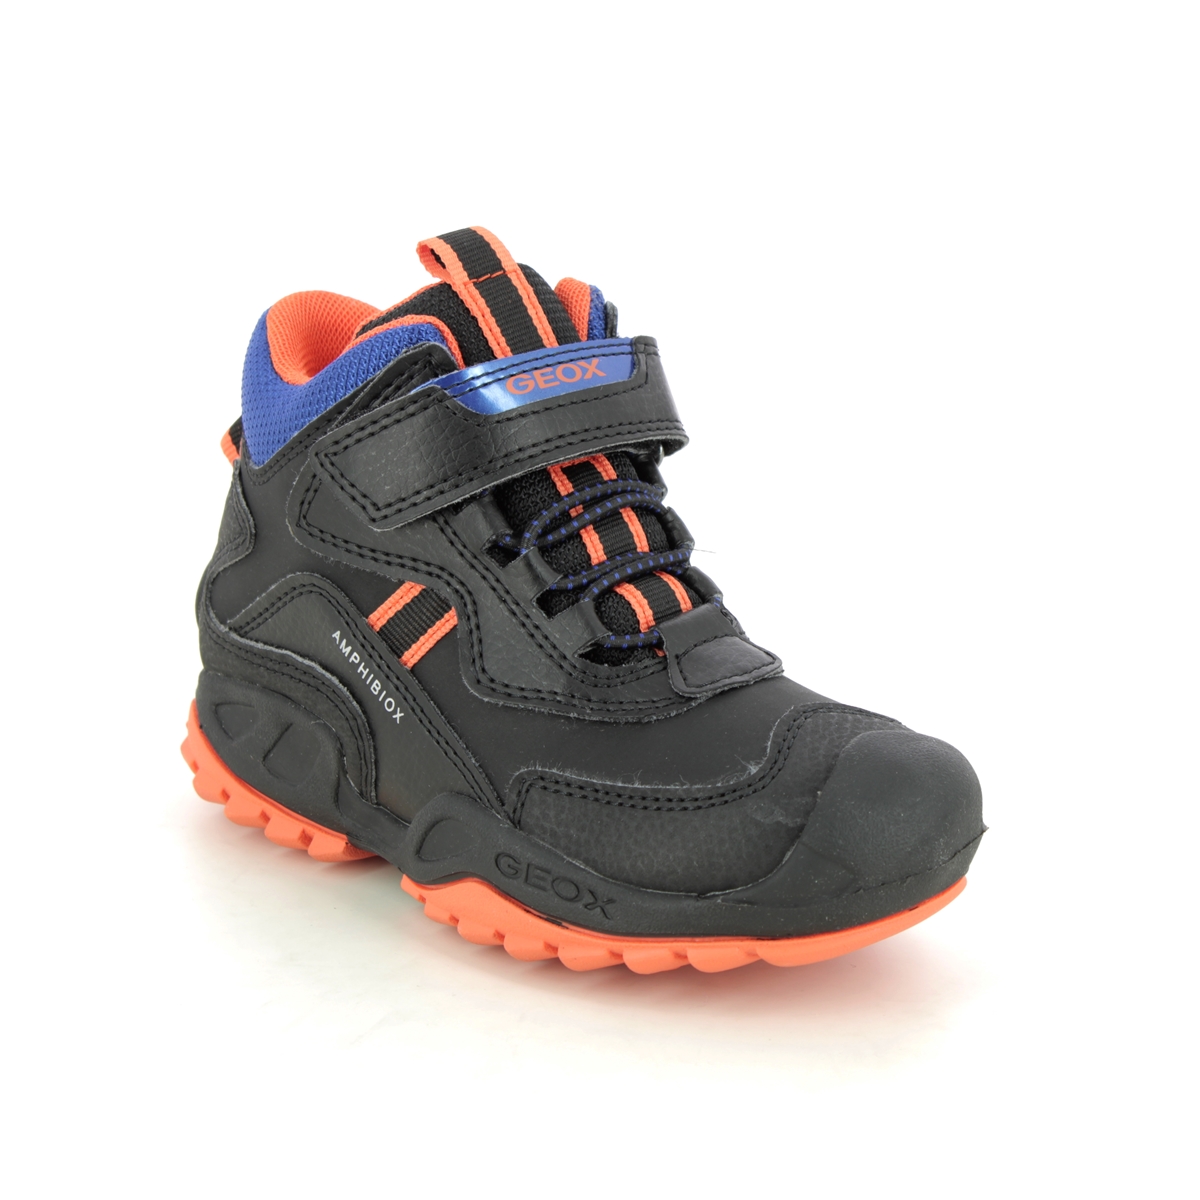 Geox - Savage Boot Tex (Black) J261Wb-C0399 In Size 37 In Plain Black For School For kids